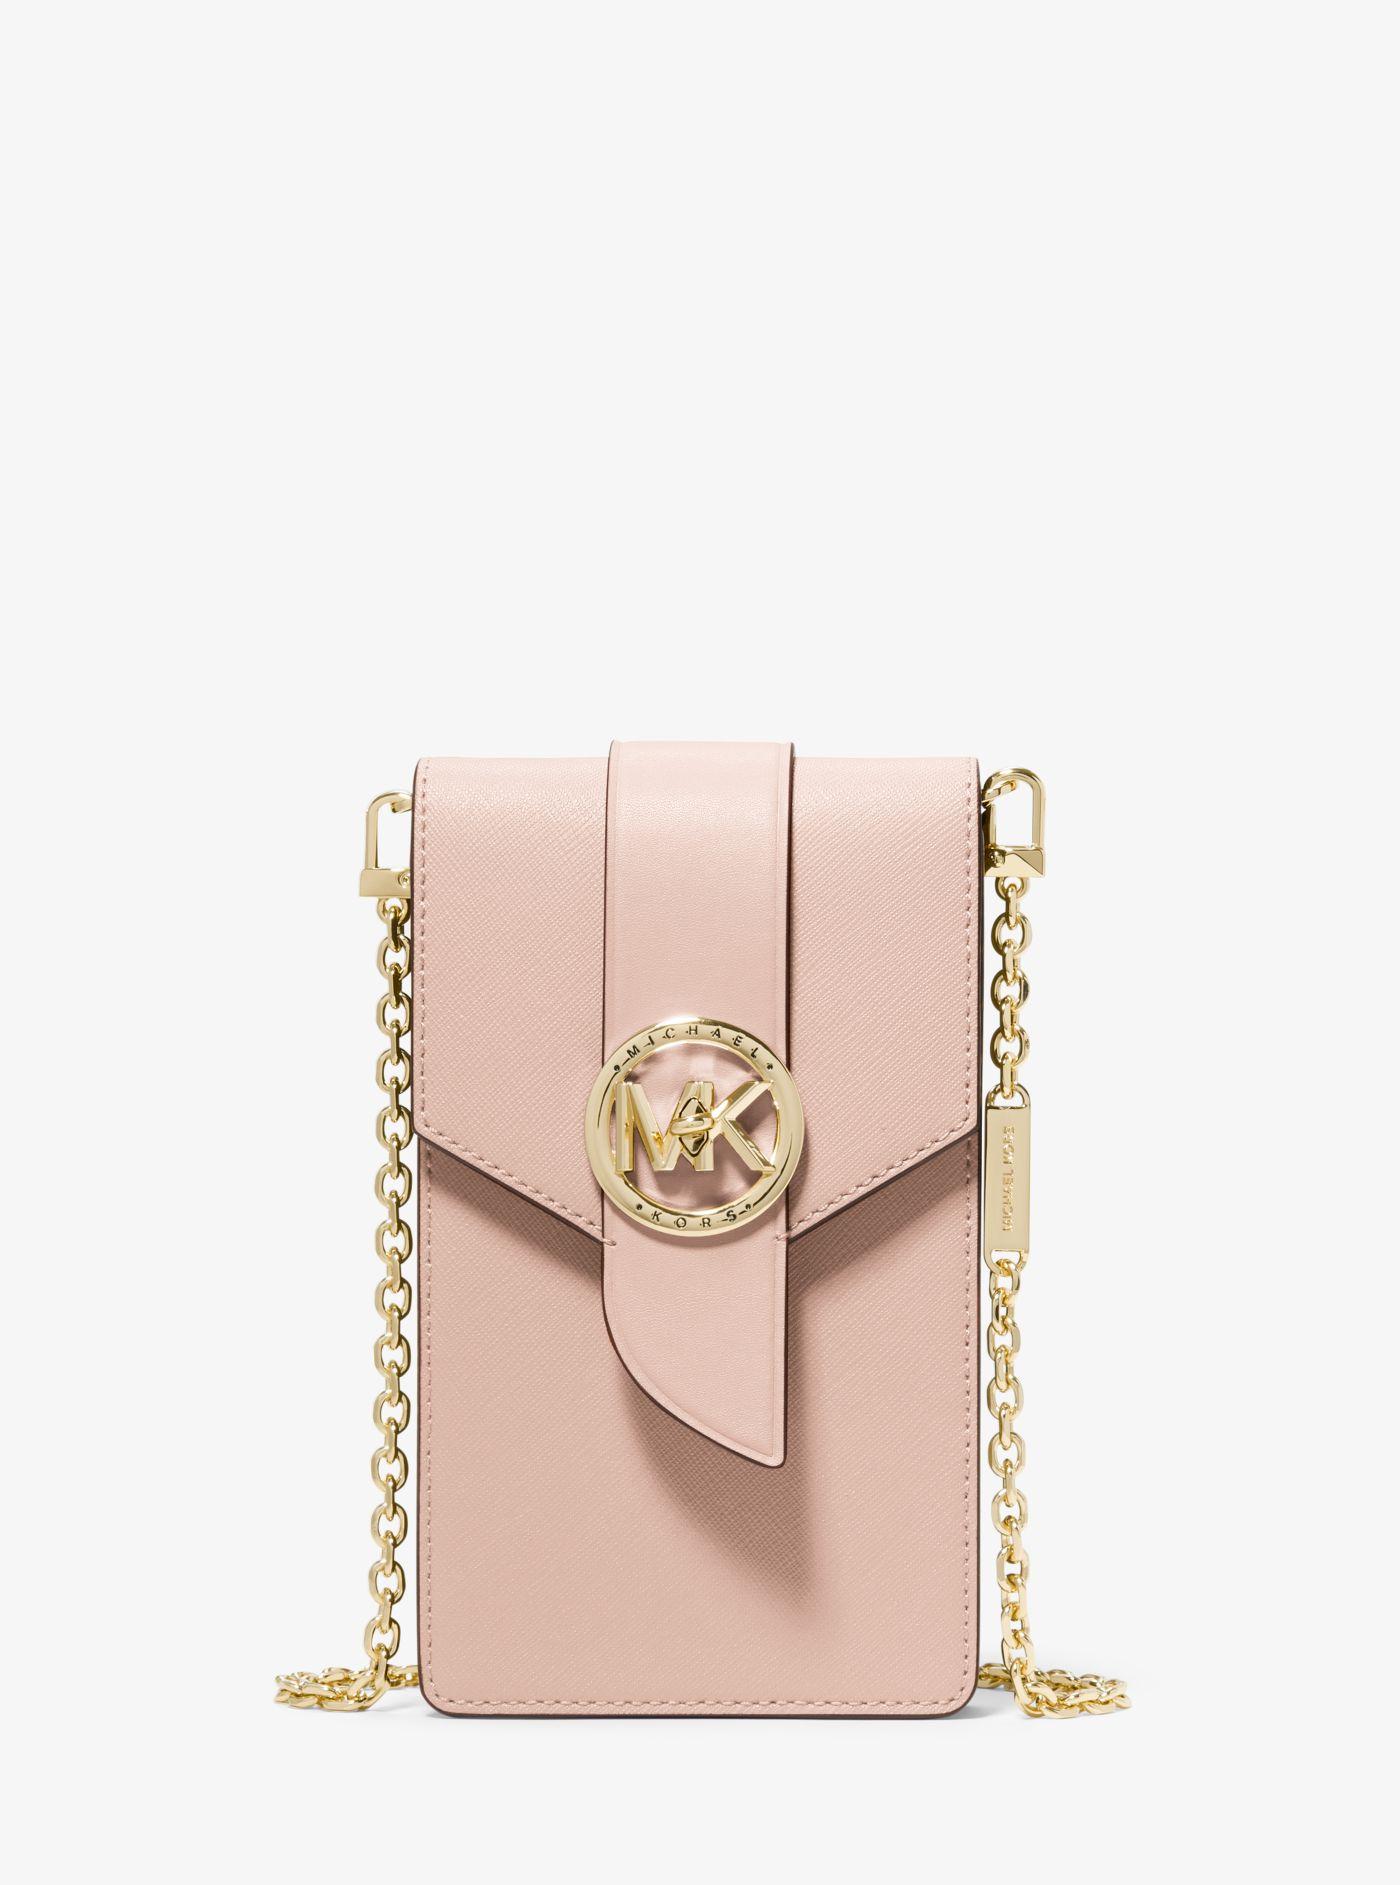 Michael Kors Small Saffiano Leather Smartphone Crossbody Bag in Pink | Lyst